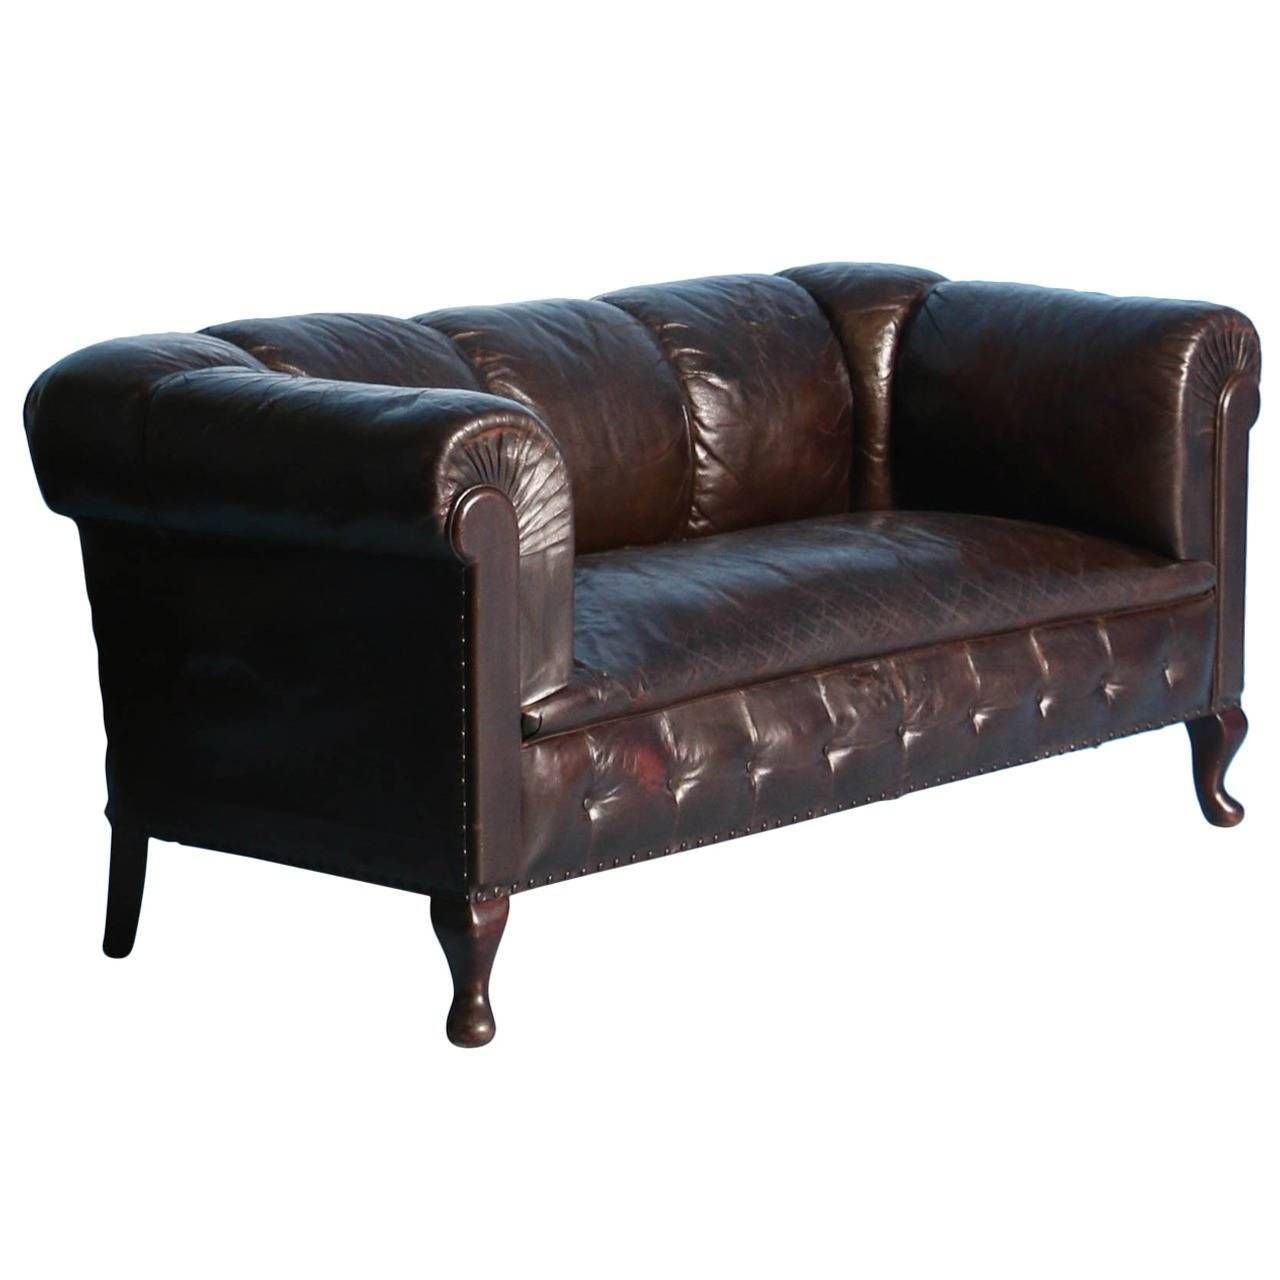 Small Vintage Chesterfield Sofa, England, Circa 1920 – 1940 At 1stdibs Intended For Chesterfield Black Sofas (View 29 of 30)